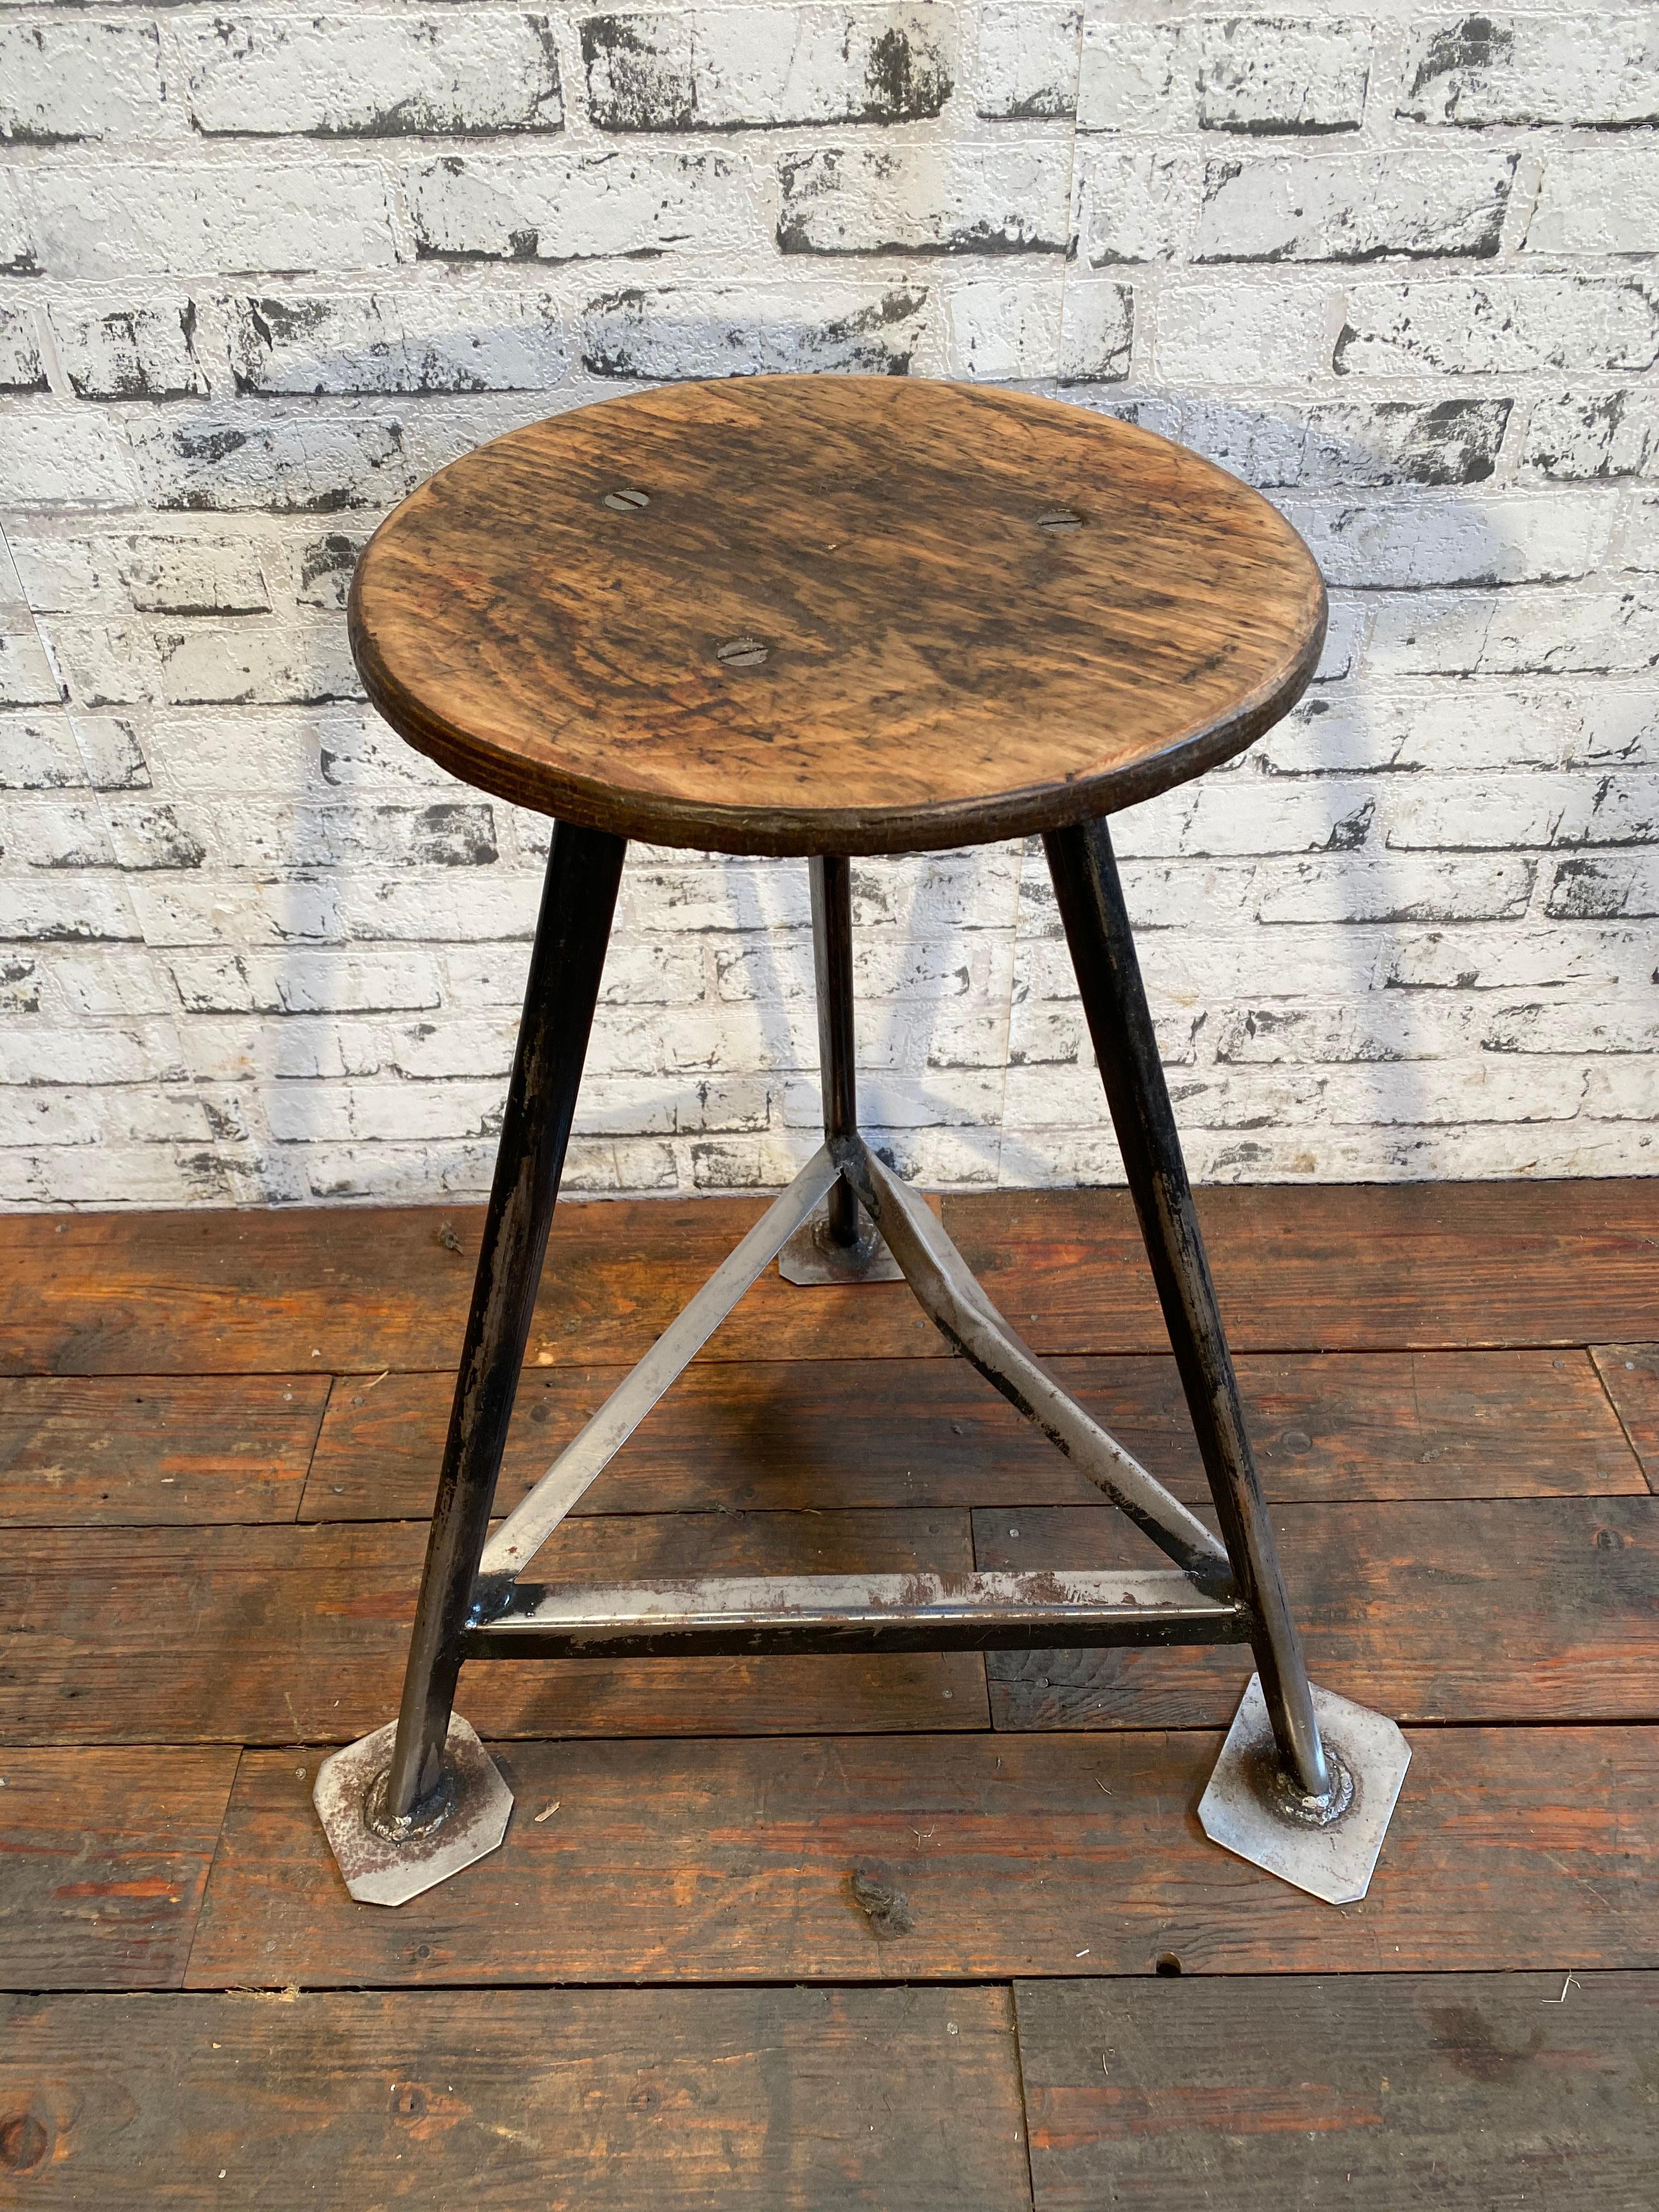 Industrial stool with a wooden seat and a black metal frame.